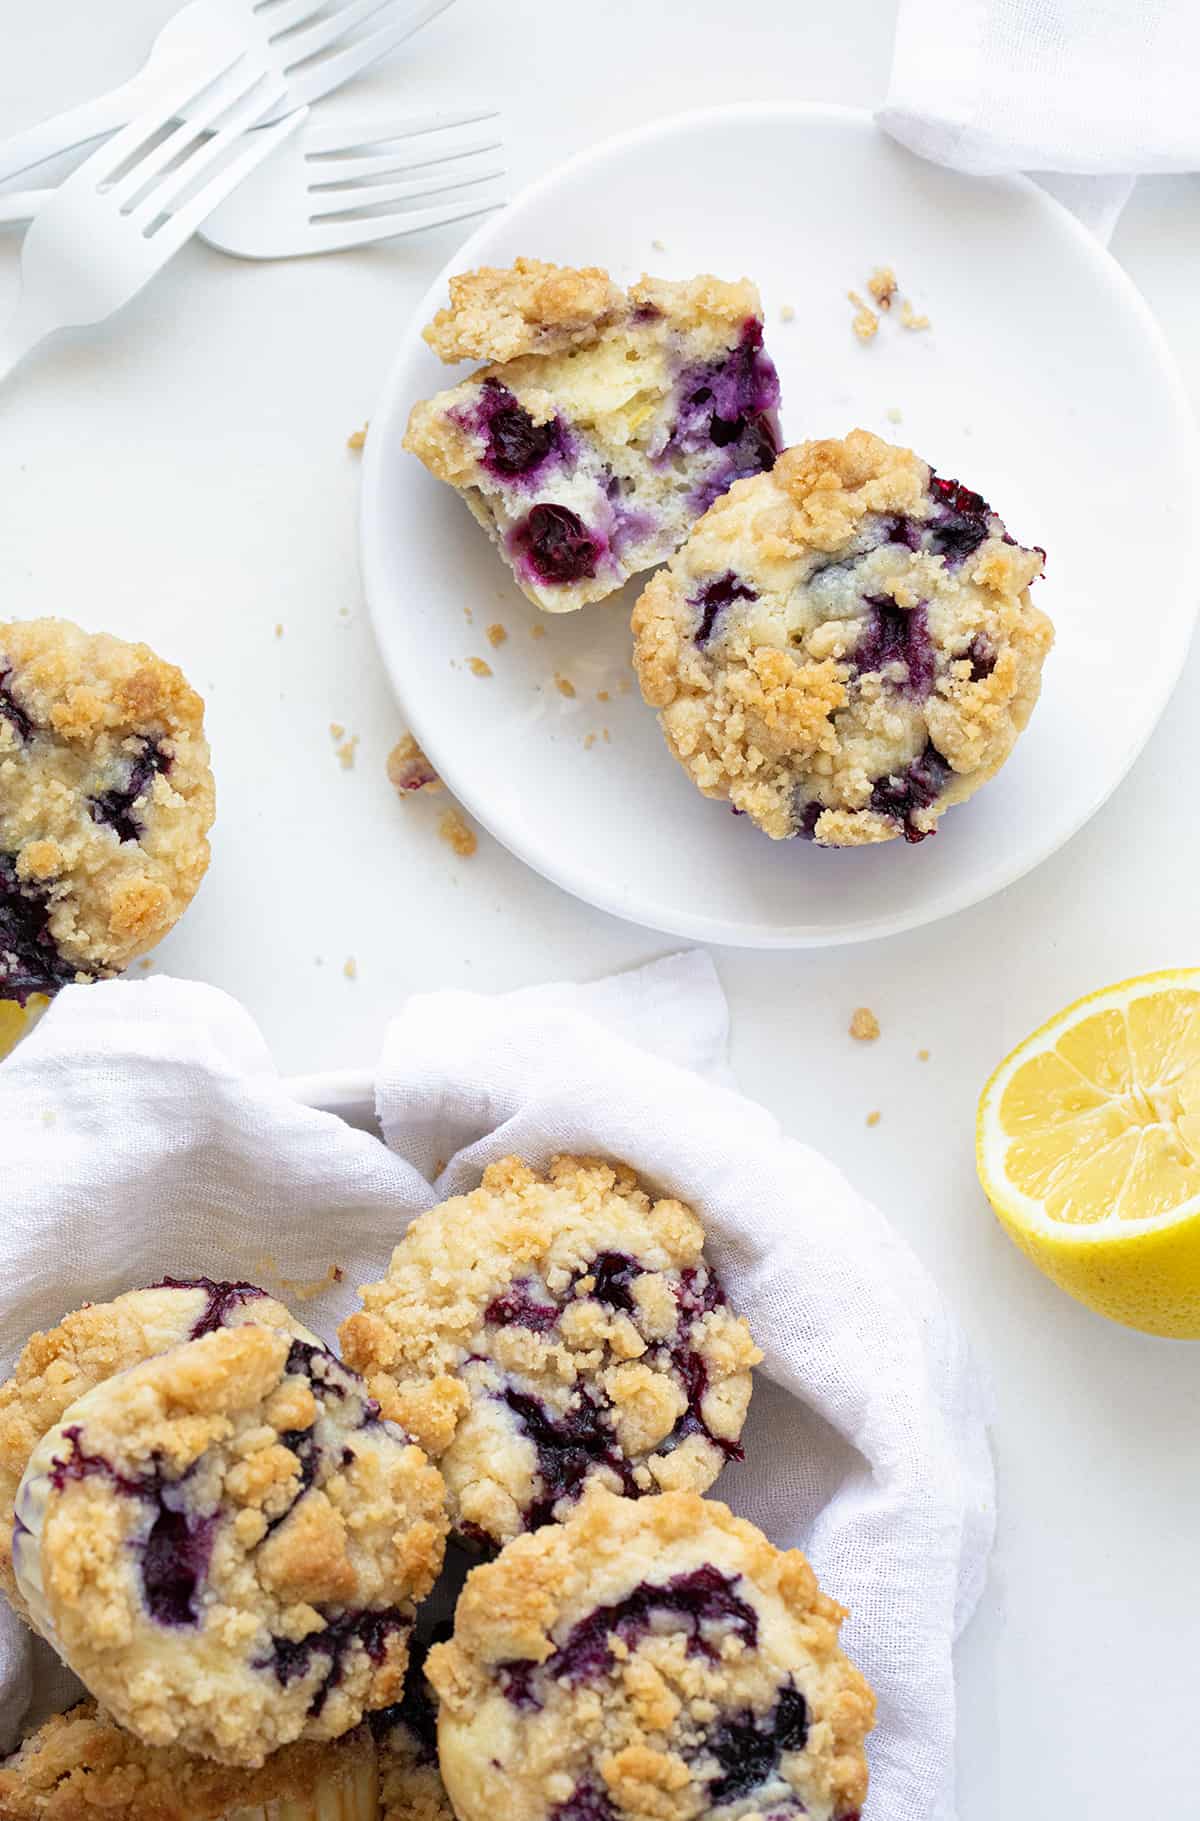 Blueberry Lemon Muffins in a Towel Lined Bowl Next to Muffins on a Plate with Fresh Lemons. 